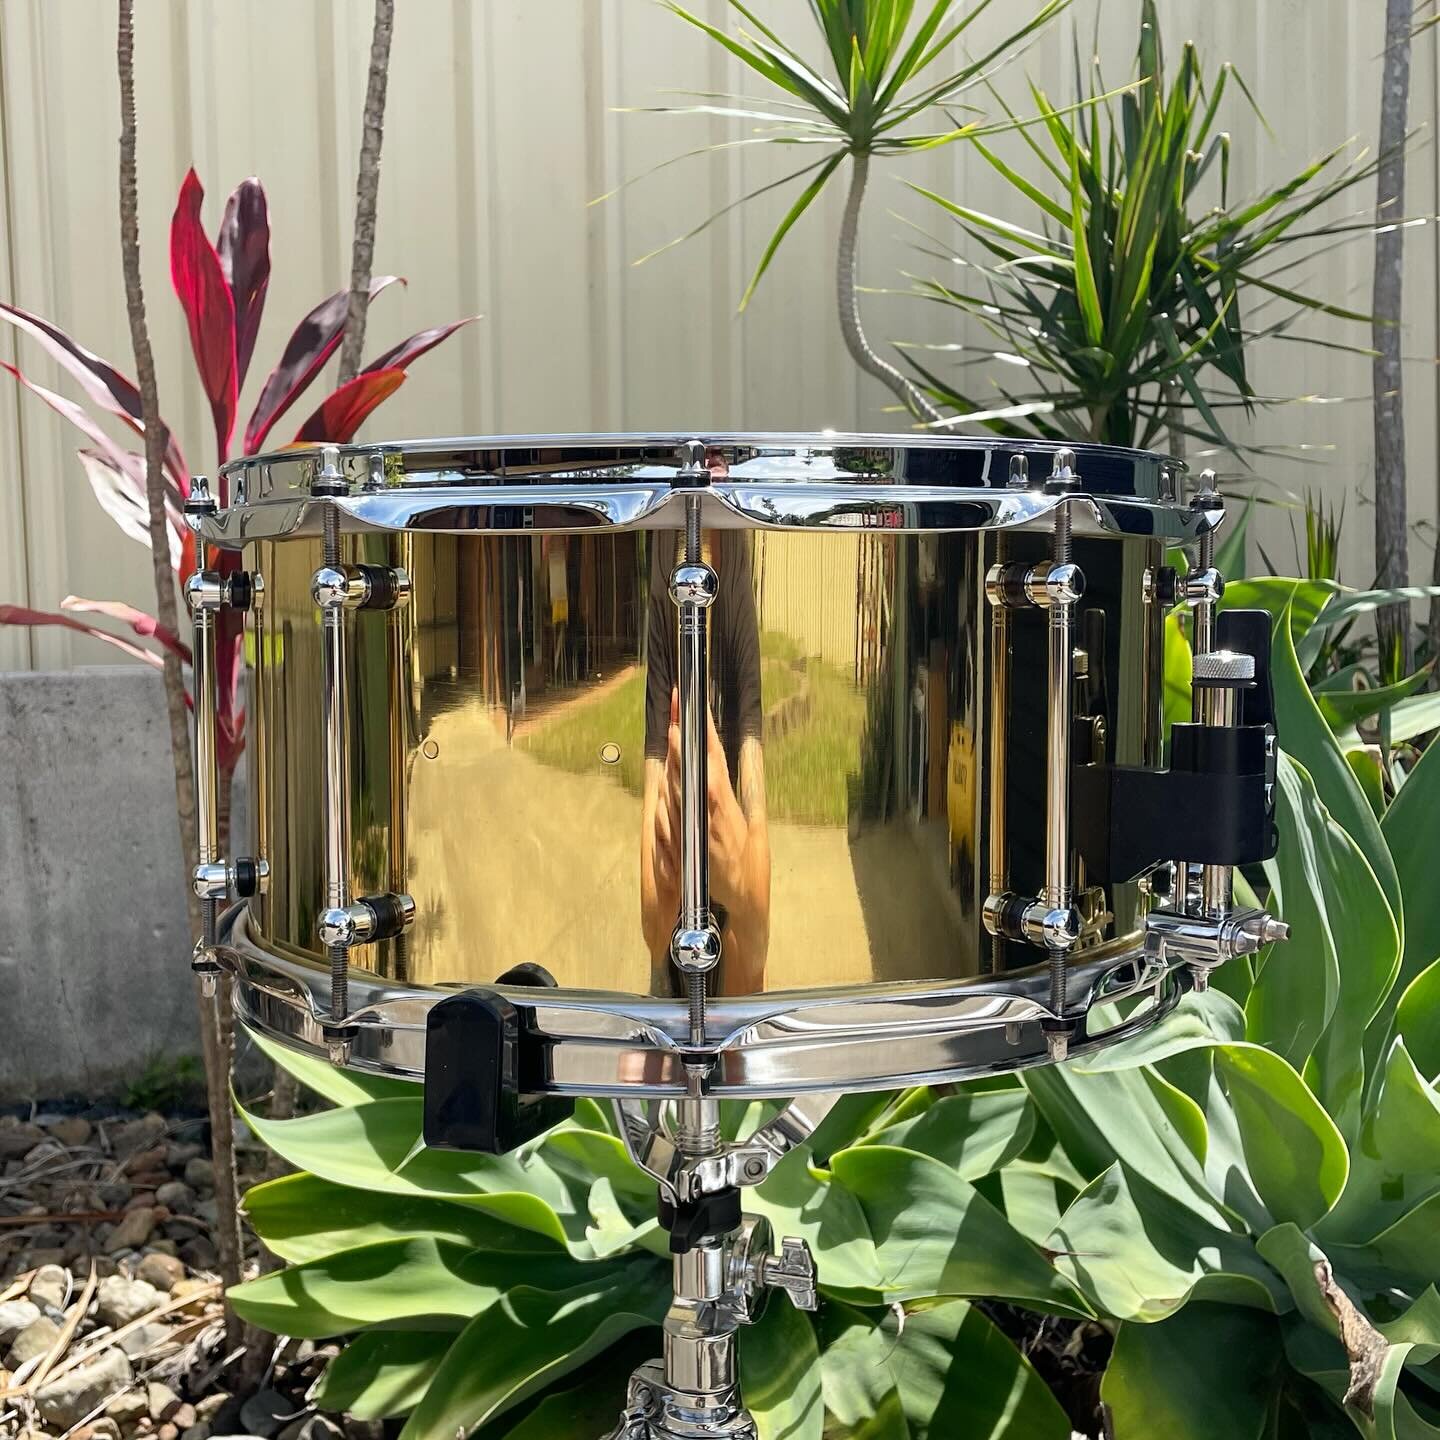 Premier Modern Classic 14&rdquo; x 7&rdquo; rolled brass snare in for a full strip, resurface + rebuild. 
A good dose of elbow grease across all parts+components, shell stripped and resealed, buffed to finish. 
Fresh Remo heads to top it off and away